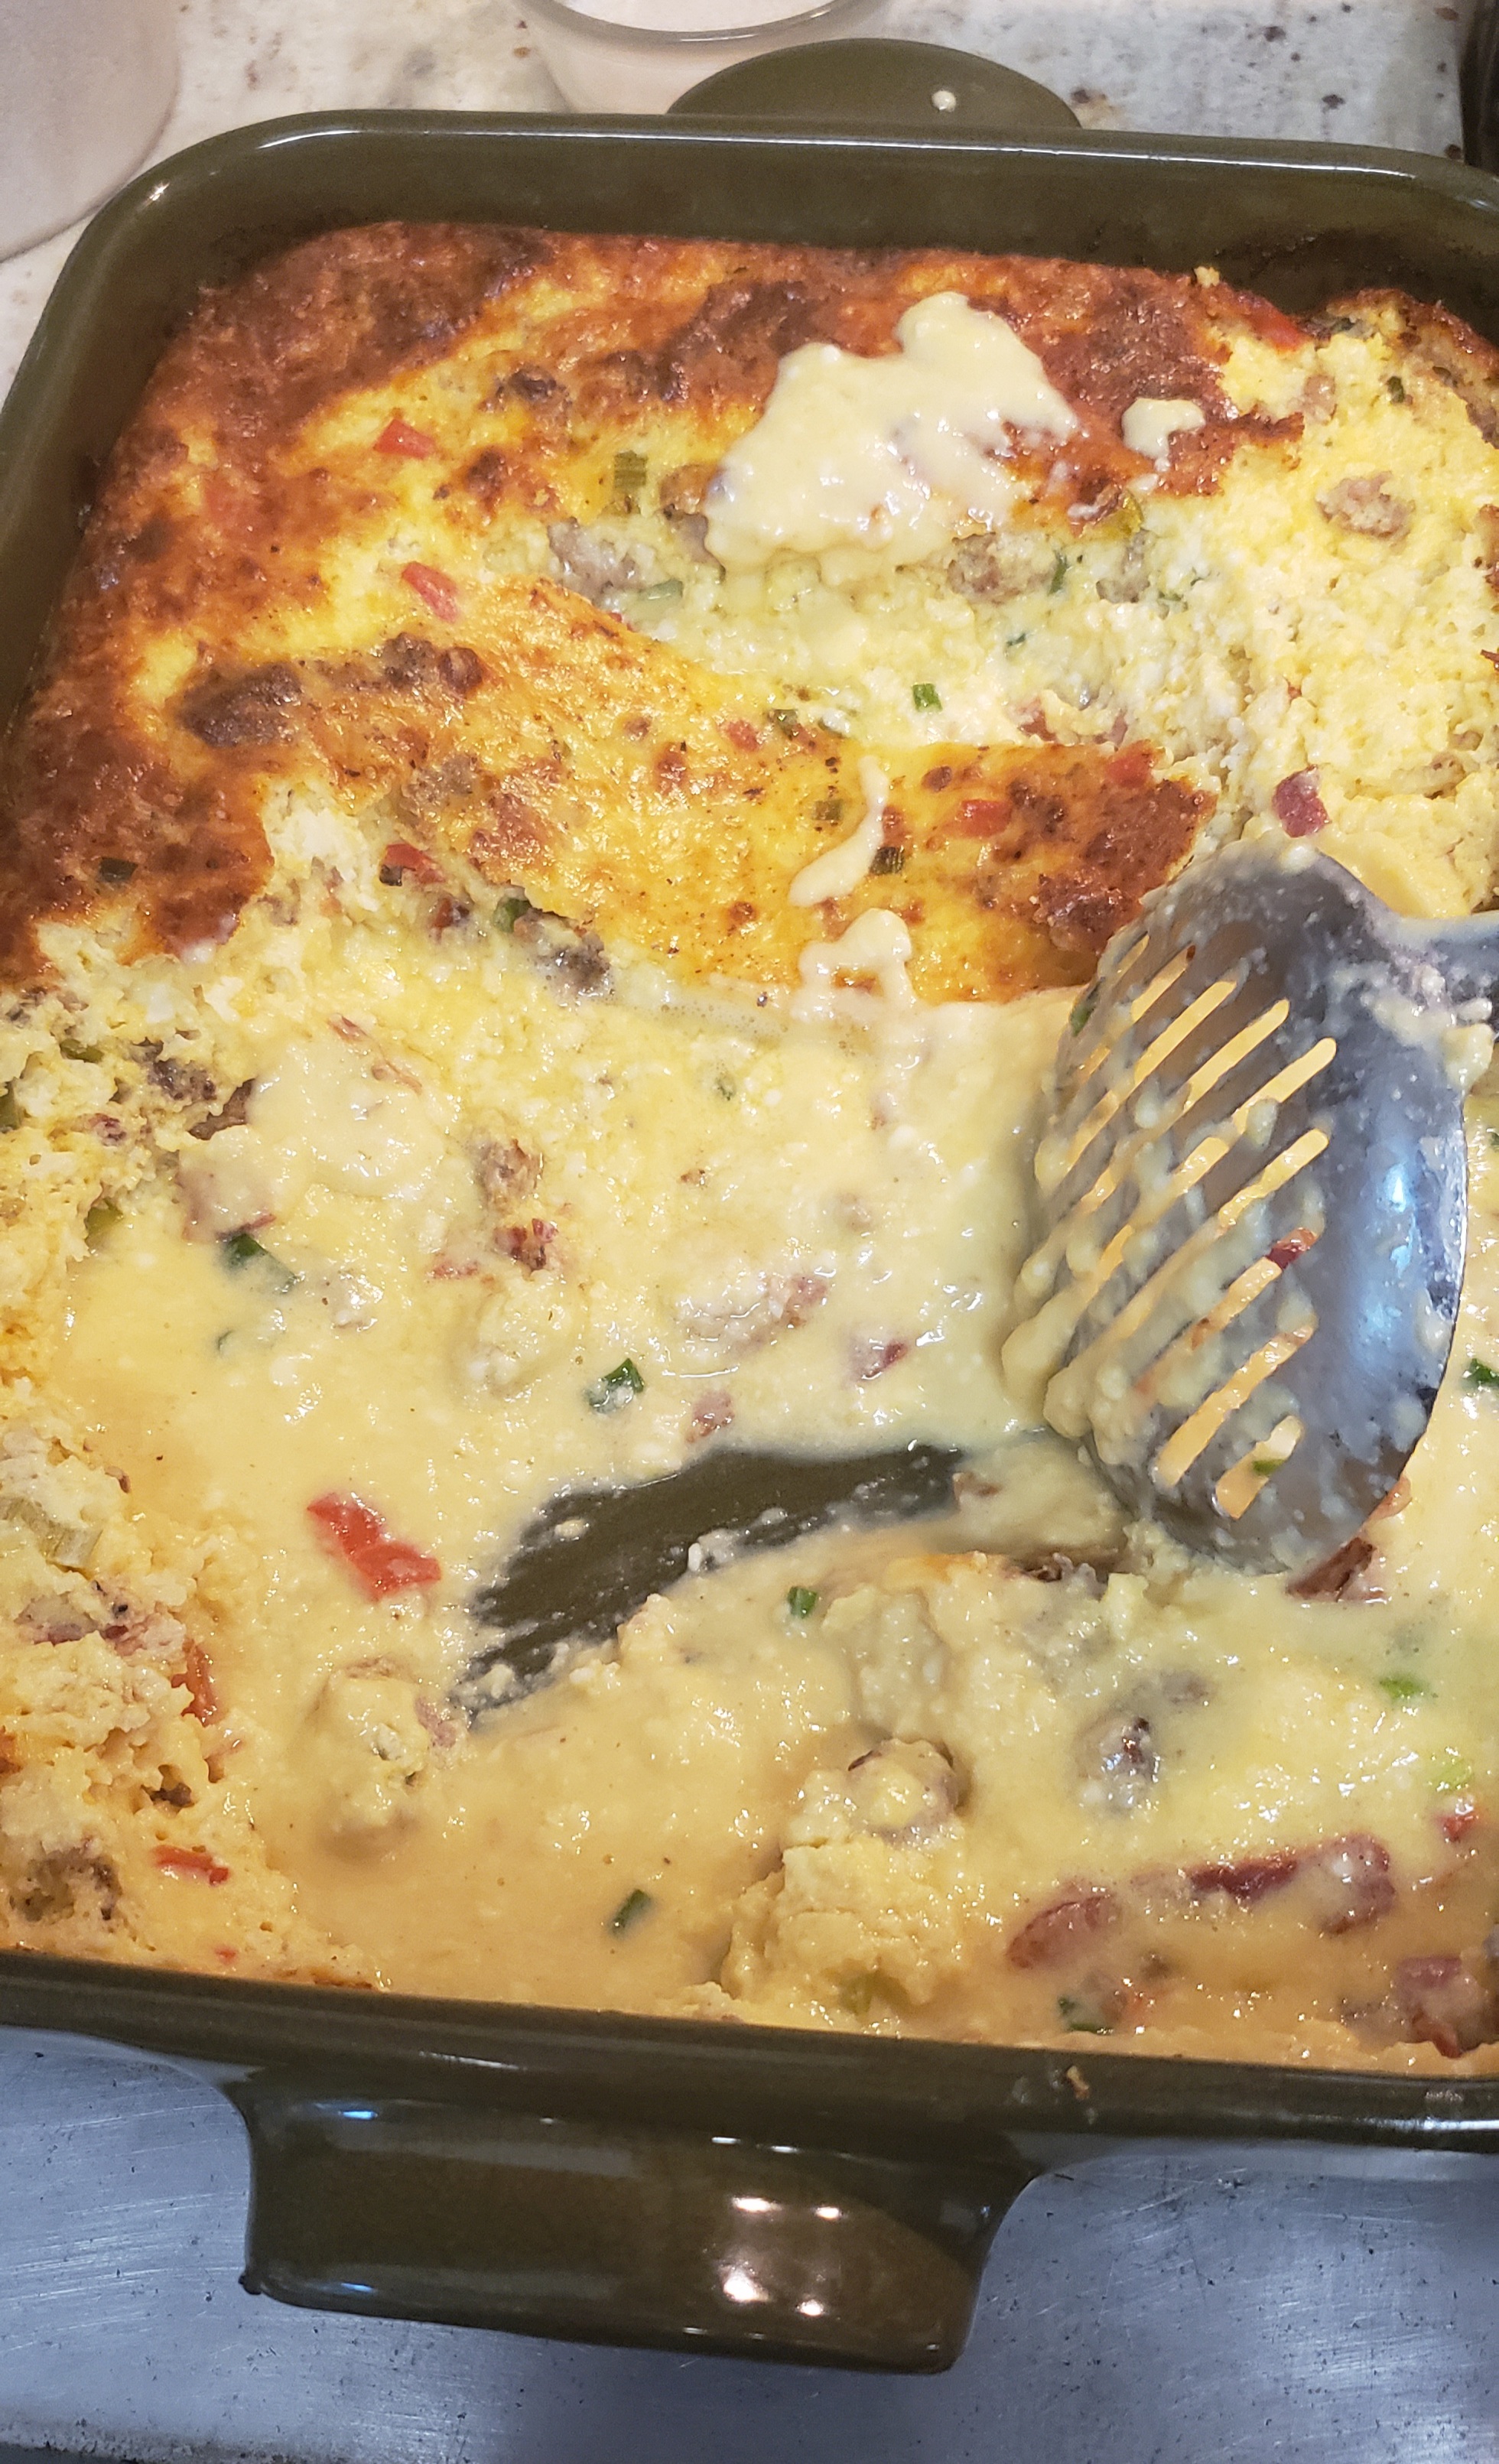 Fast-and-Fabulous Egg and Cottage Cheese Casserole Cheryl